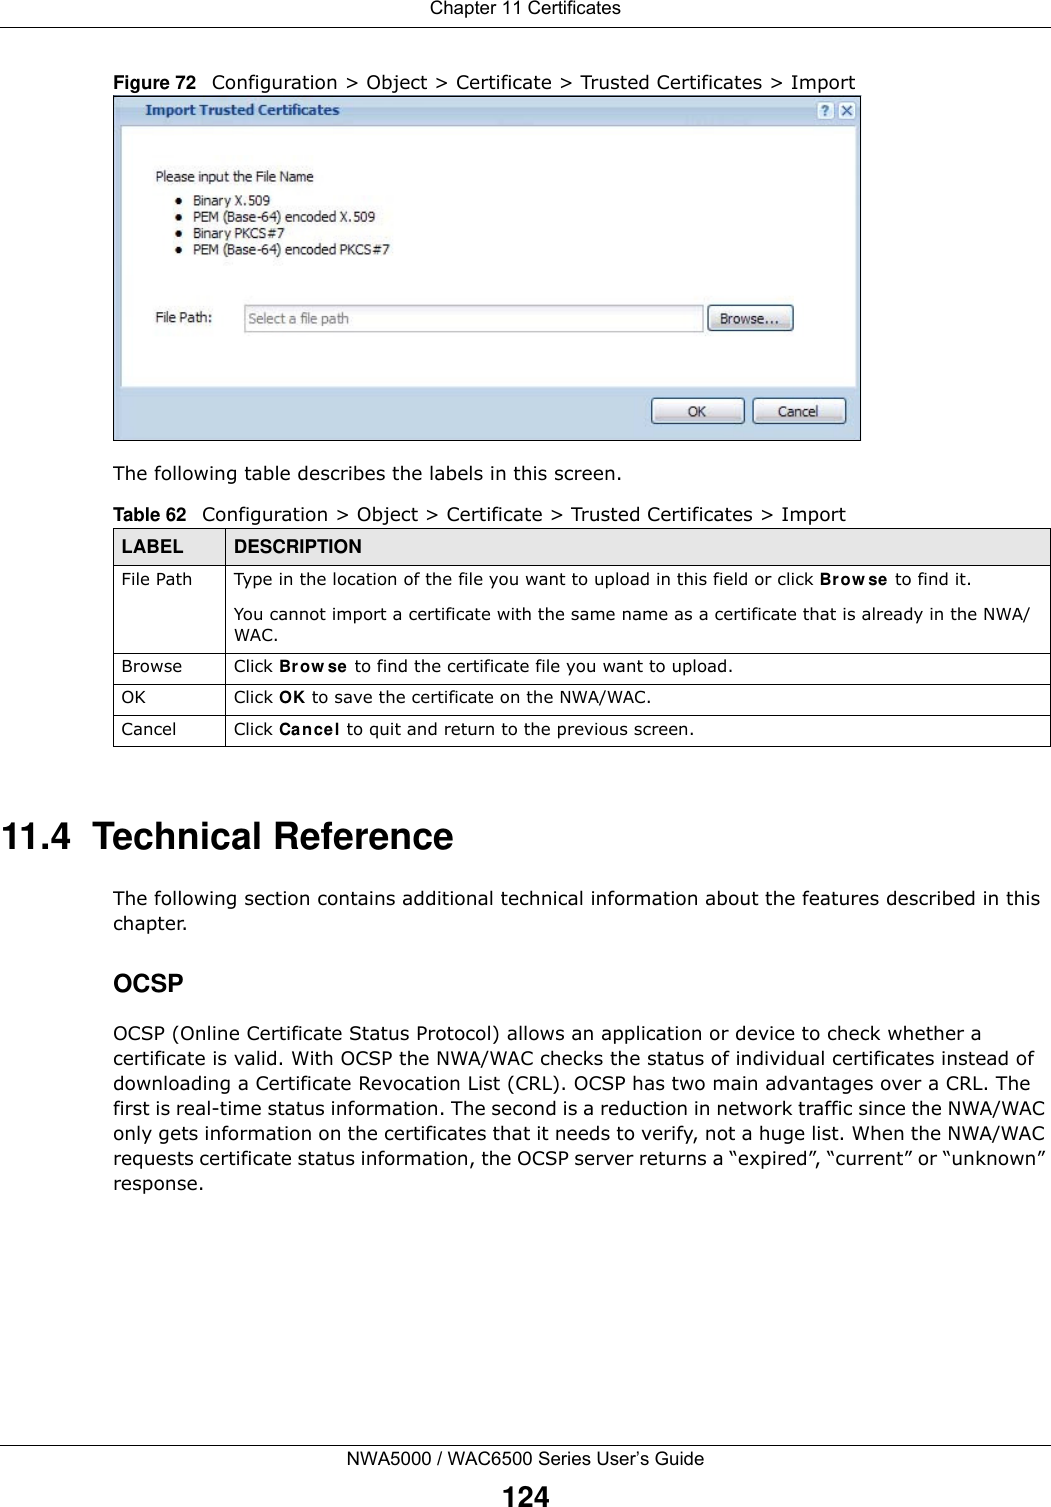 Chapter 11 CertificatesNWA5000 / WAC6500 Series User’s Guide124Figure 72   Configuration &gt; Object &gt; Certificate &gt; Trusted Certificates &gt; ImportThe following table describes the labels in this screen. 11.4  Technical ReferenceThe following section contains additional technical information about the features described in this chapter.OCSPOCSP (Online Certificate Status Protocol) allows an application or device to check whether a certificate is valid. With OCSP the NWA/WAC checks the status of individual certificates instead of downloading a Certificate Revocation List (CRL). OCSP has two main advantages over a CRL. The first is real-time status information. The second is a reduction in network traffic since the NWA/WAC only gets information on the certificates that it needs to verify, not a huge list. When the NWA/WAC requests certificate status information, the OCSP server returns a “expired”, “current” or “unknown” response.Table 62   Configuration &gt; Object &gt; Certificate &gt; Trusted Certificates &gt; ImportLABEL DESCRIPTIONFile Path  Type in the location of the file you want to upload in this field or click Br ow se to find it.You cannot import a certificate with the same name as a certificate that is already in the NWA/WAC.Browse Click Brow se  to find the certificate file you want to upload. OK Click OK to save the certificate on the NWA/WAC.Cancel Click Cancel to quit and return to the previous screen.